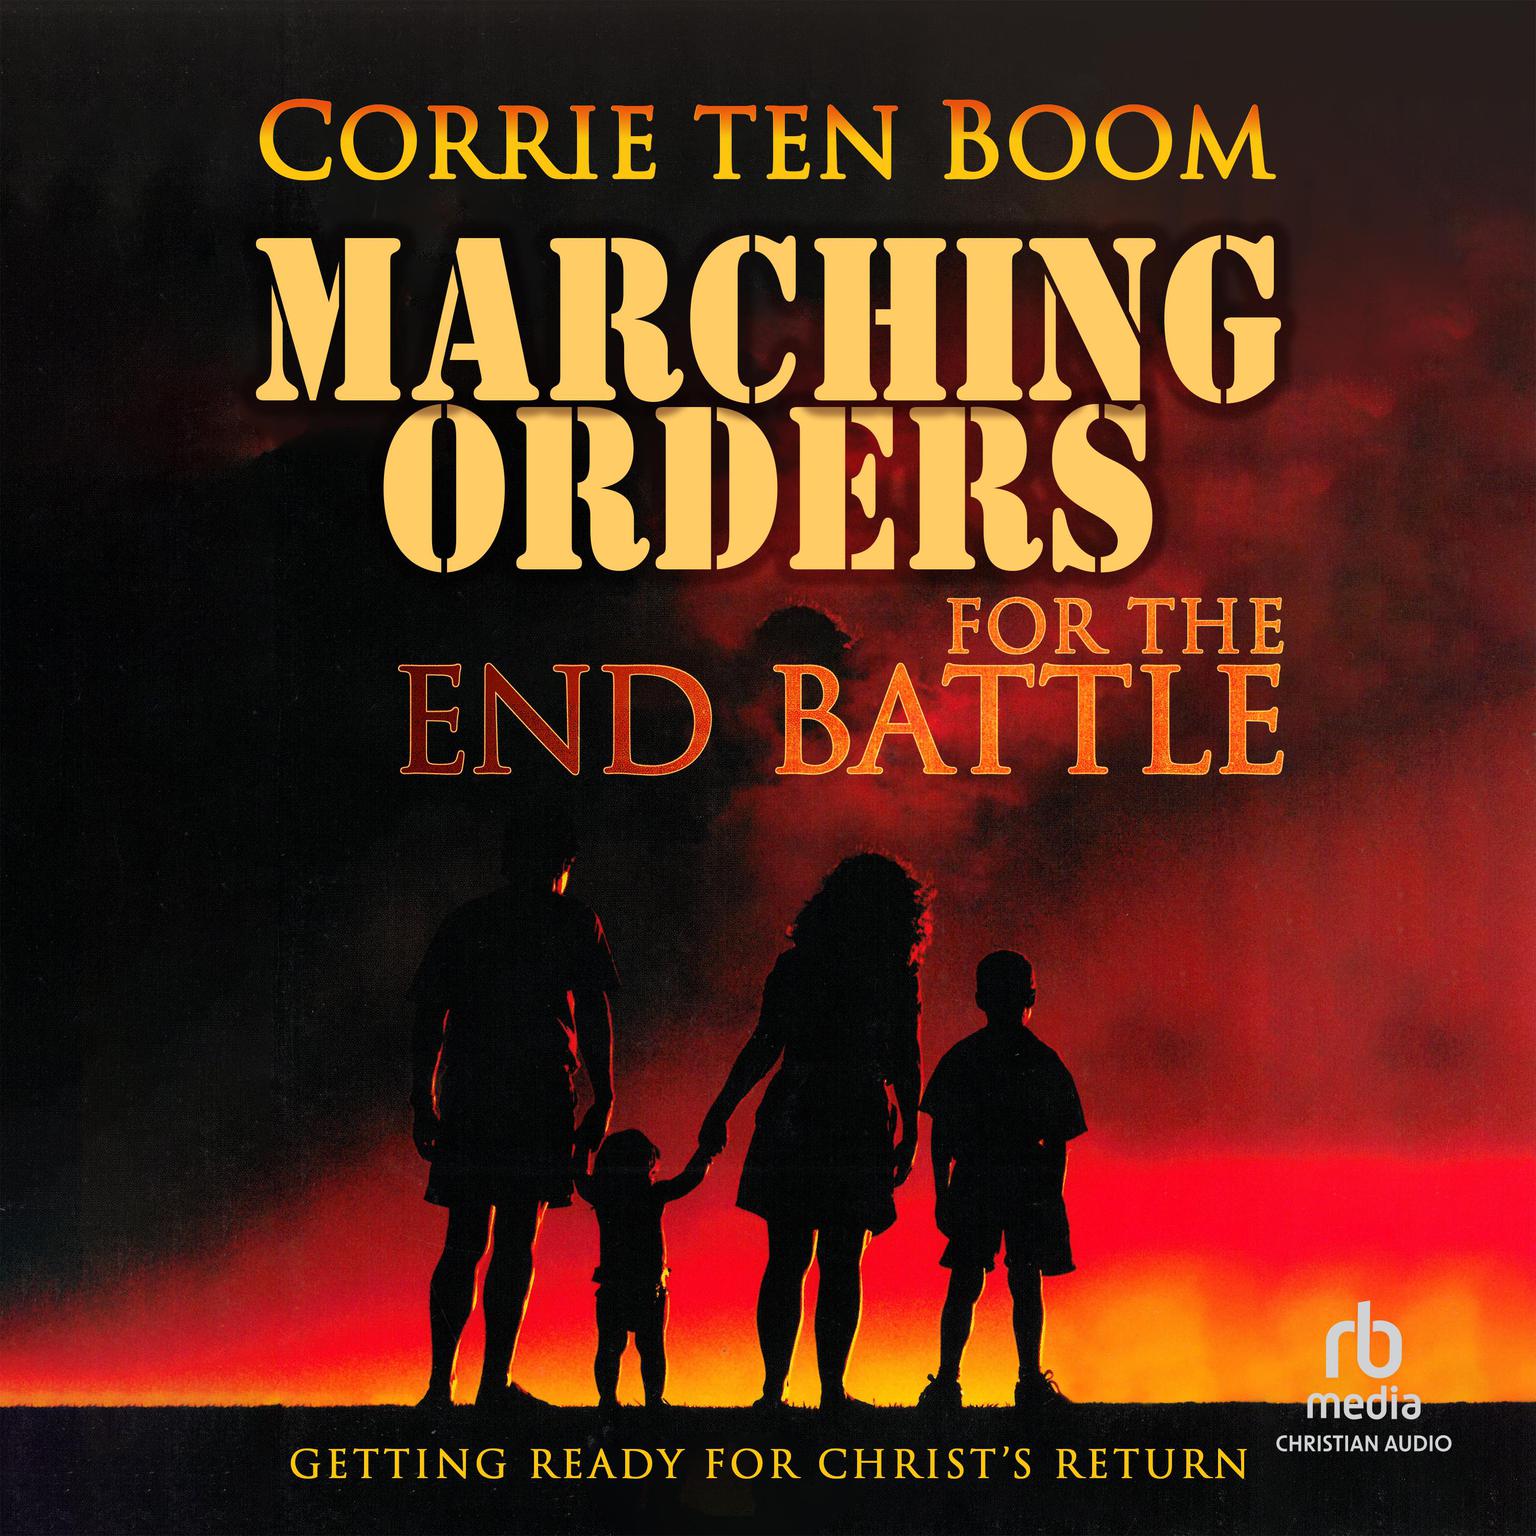 Marching Orders for the End Battle: Getting Ready for Christs Return Audiobook, by Corrie ten Boom